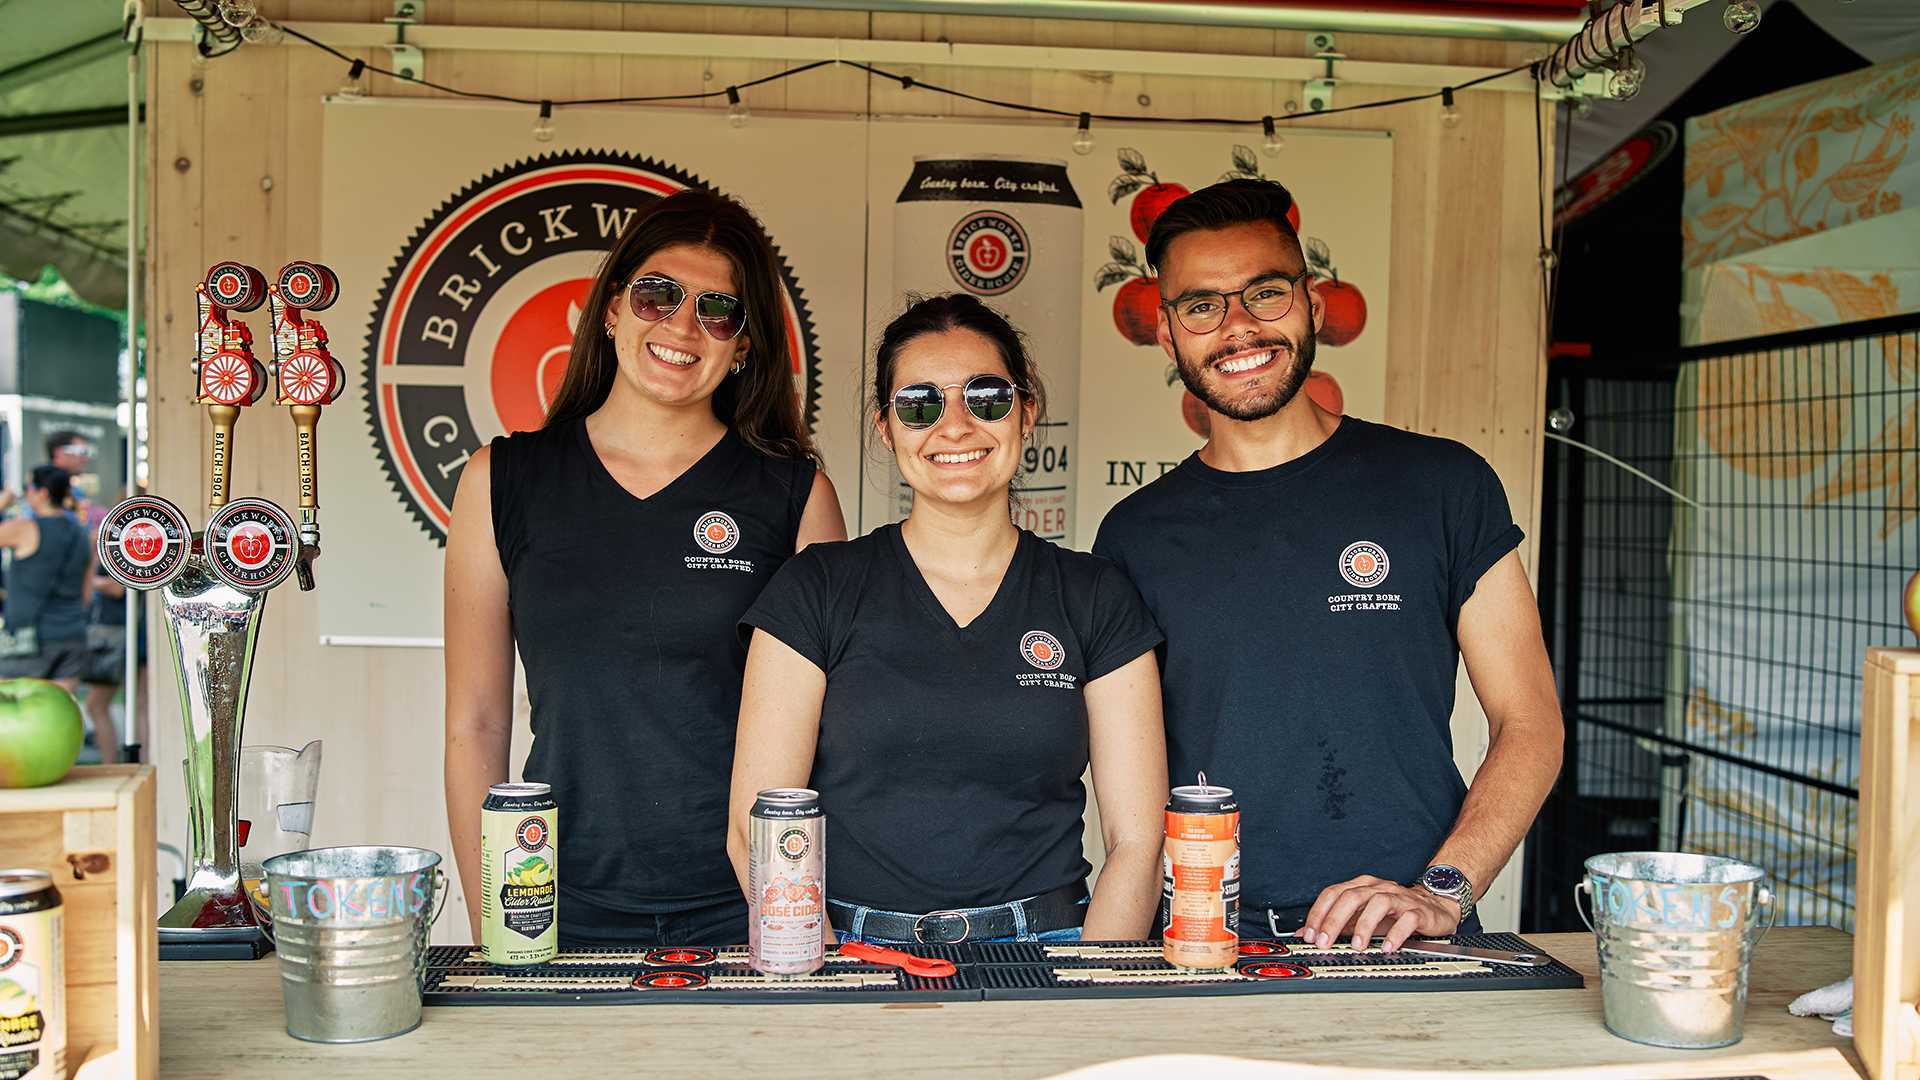 The team from Brickworks Cider is happy to hand out drinks at Fizz Fest